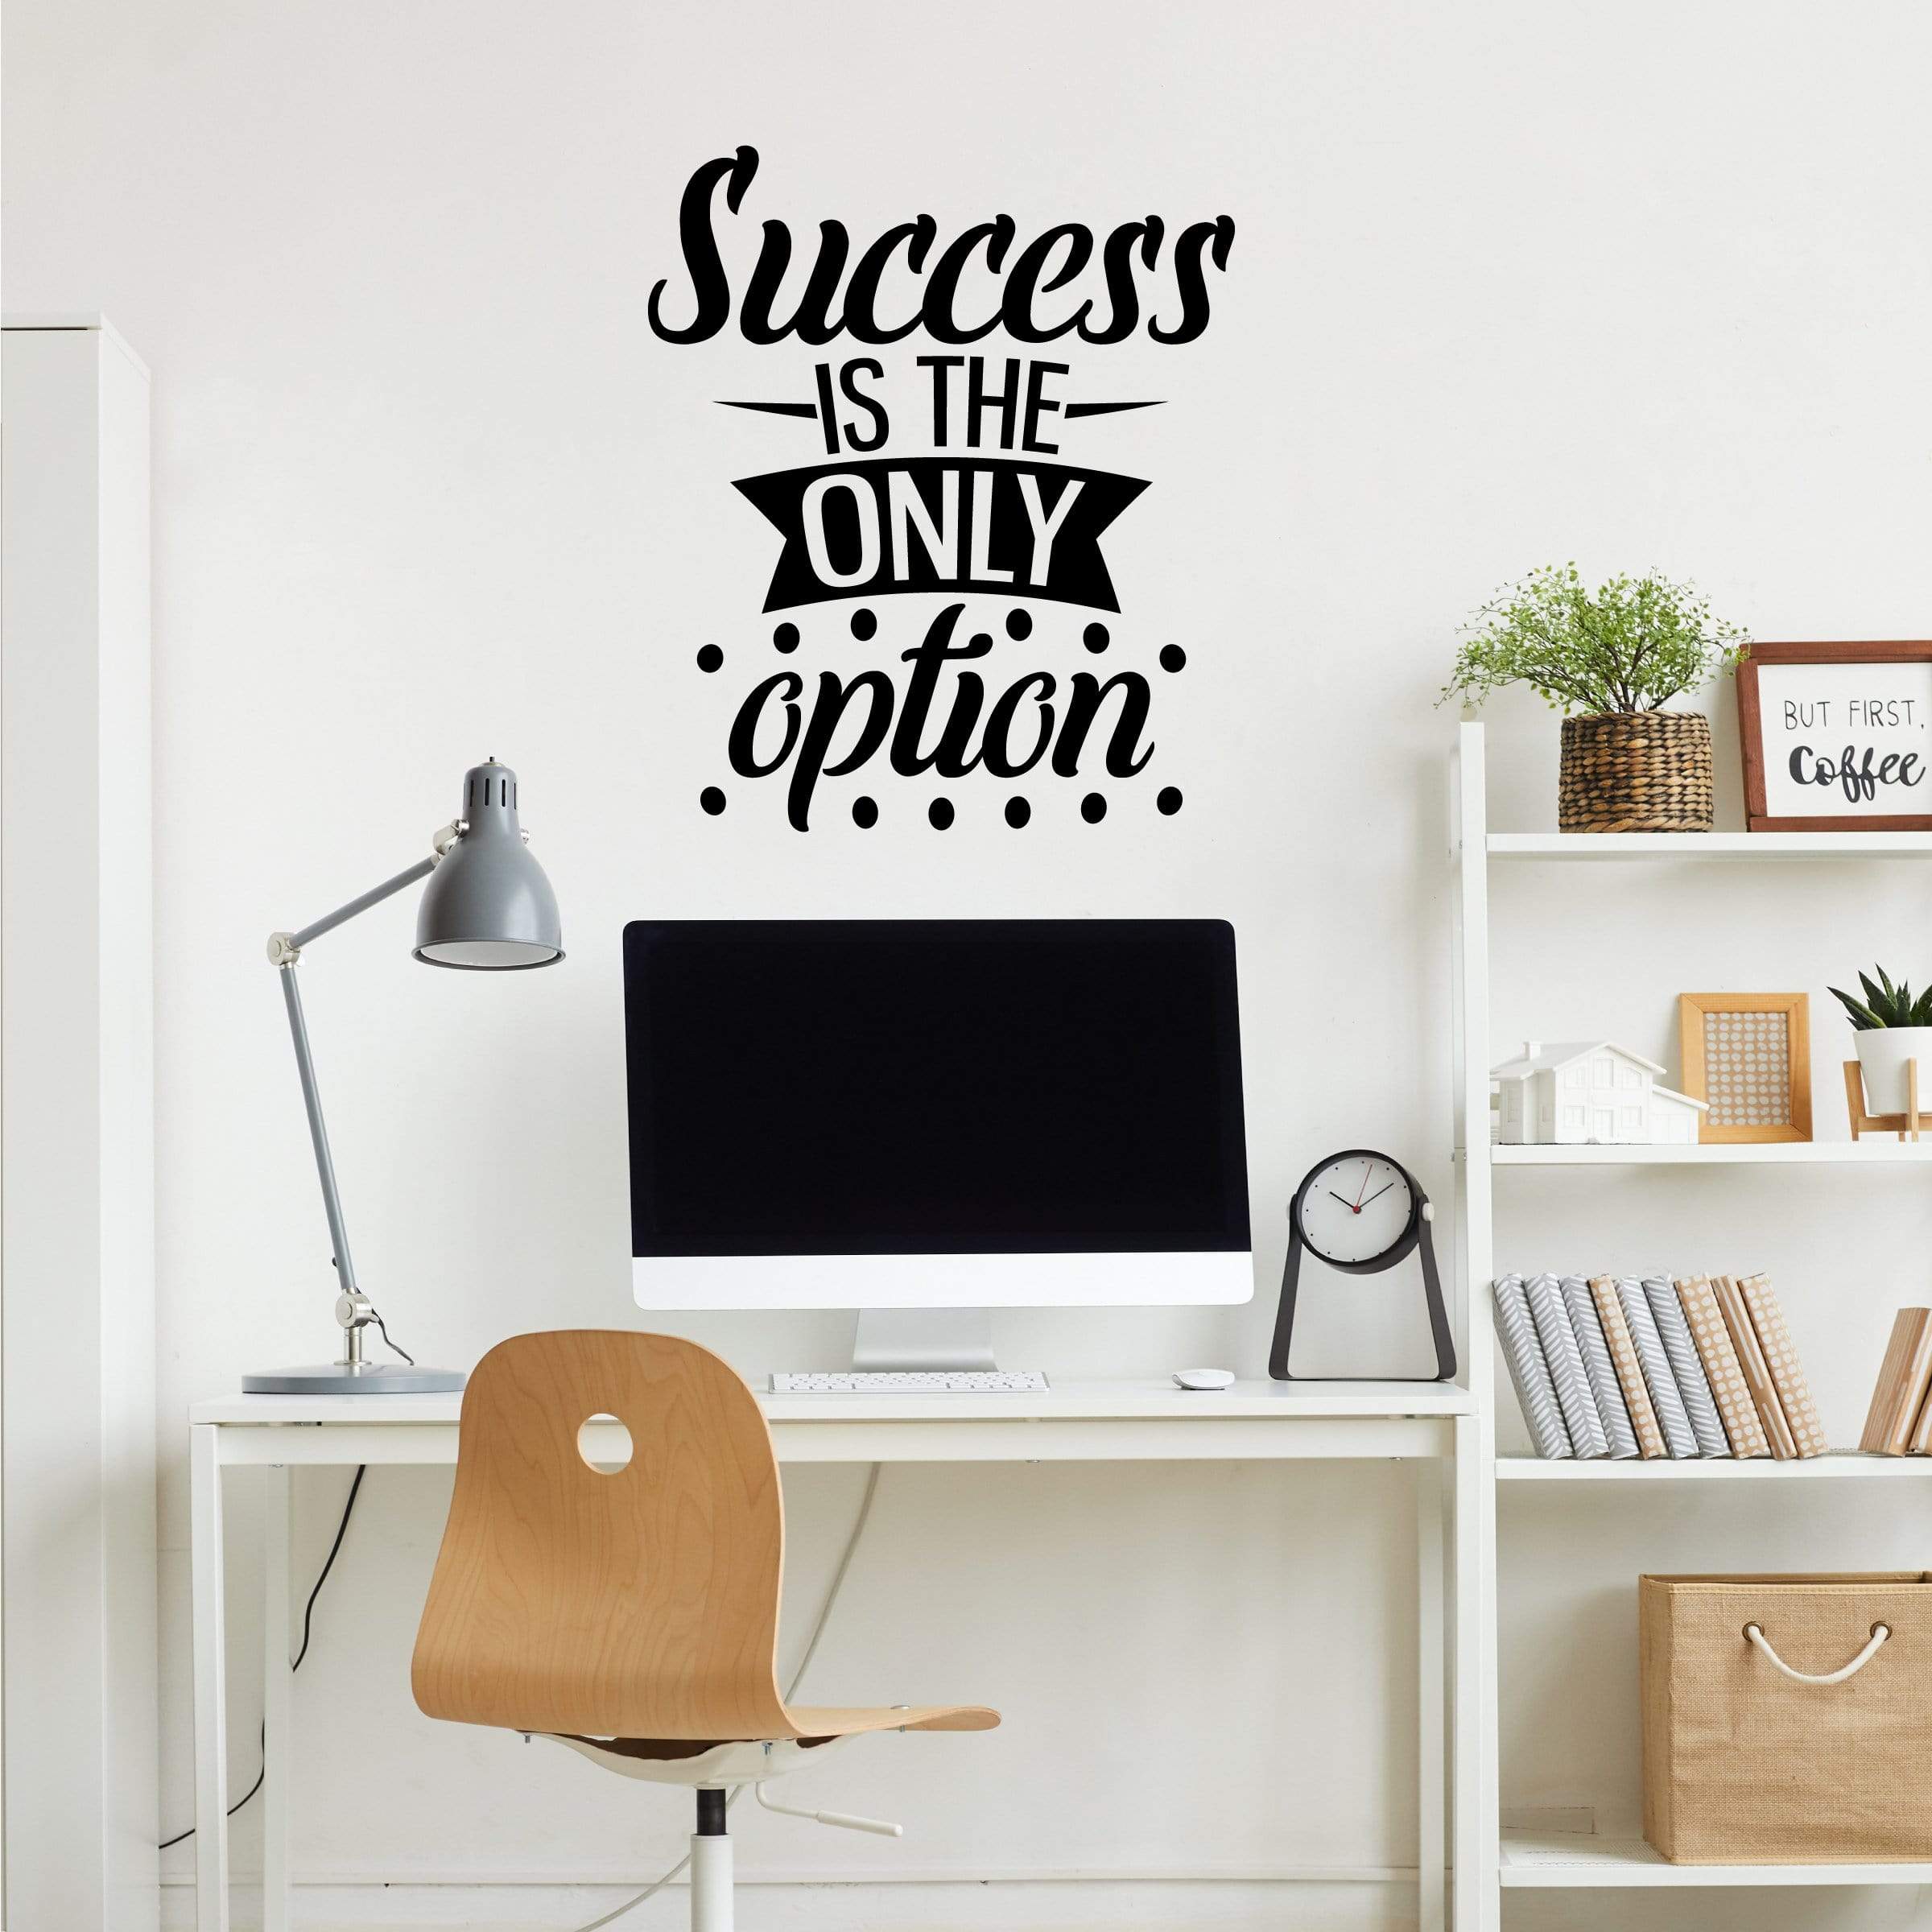 Success great design inspirational quote stickers